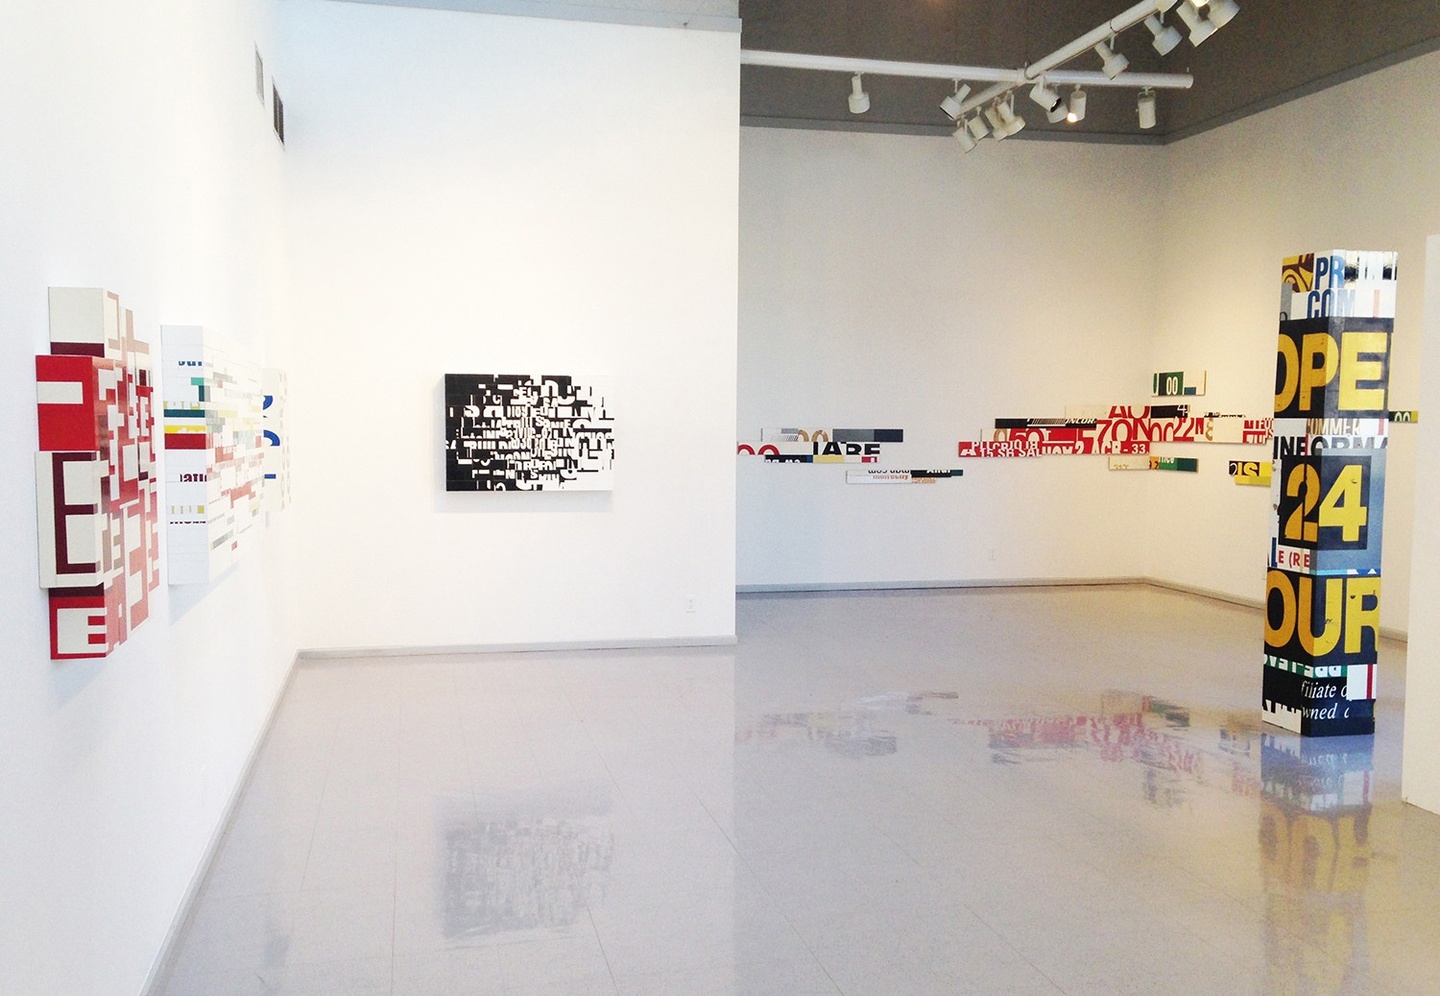 Installation view of a gallery space: on white walls several works are mounted; these art pieces are geometric sculptures, the surfaces of which are adorned with collaged/manipulated typography. In the center of this space to the right is a column/sculpture, with bold stenciled lettering.